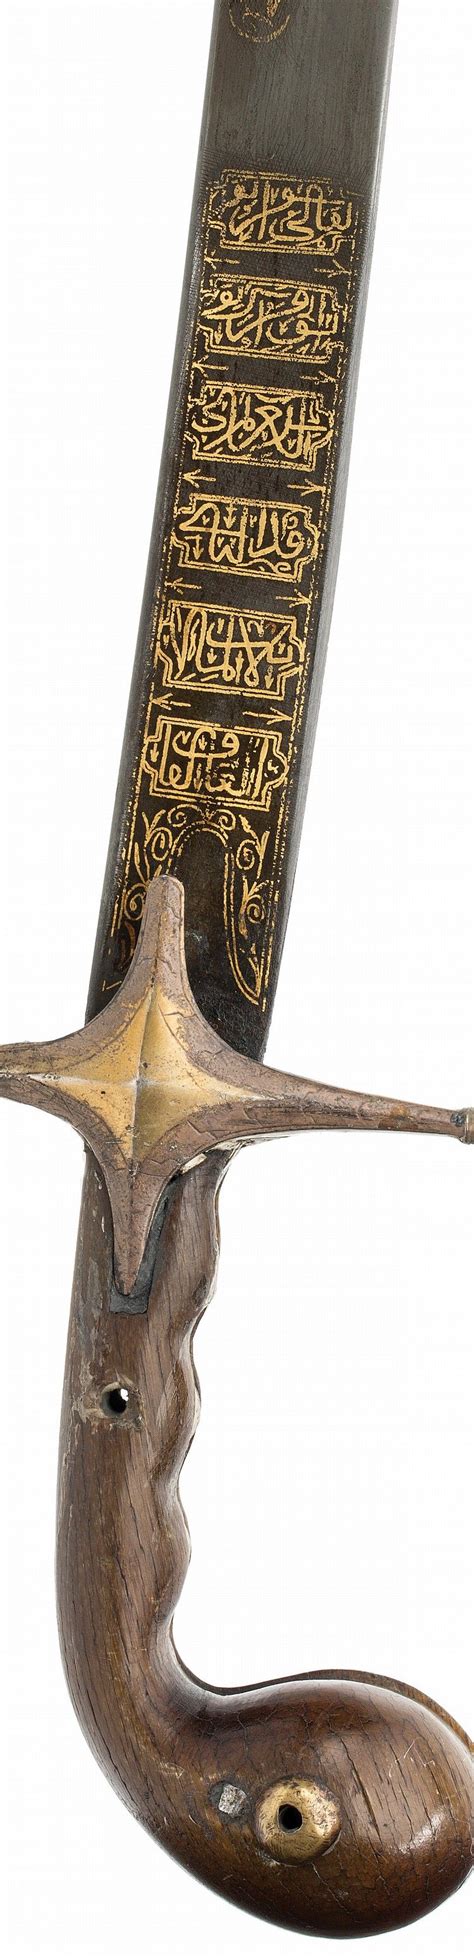 Sold Price: Ottoman Sword, Late 18th/Early 19th Century ...